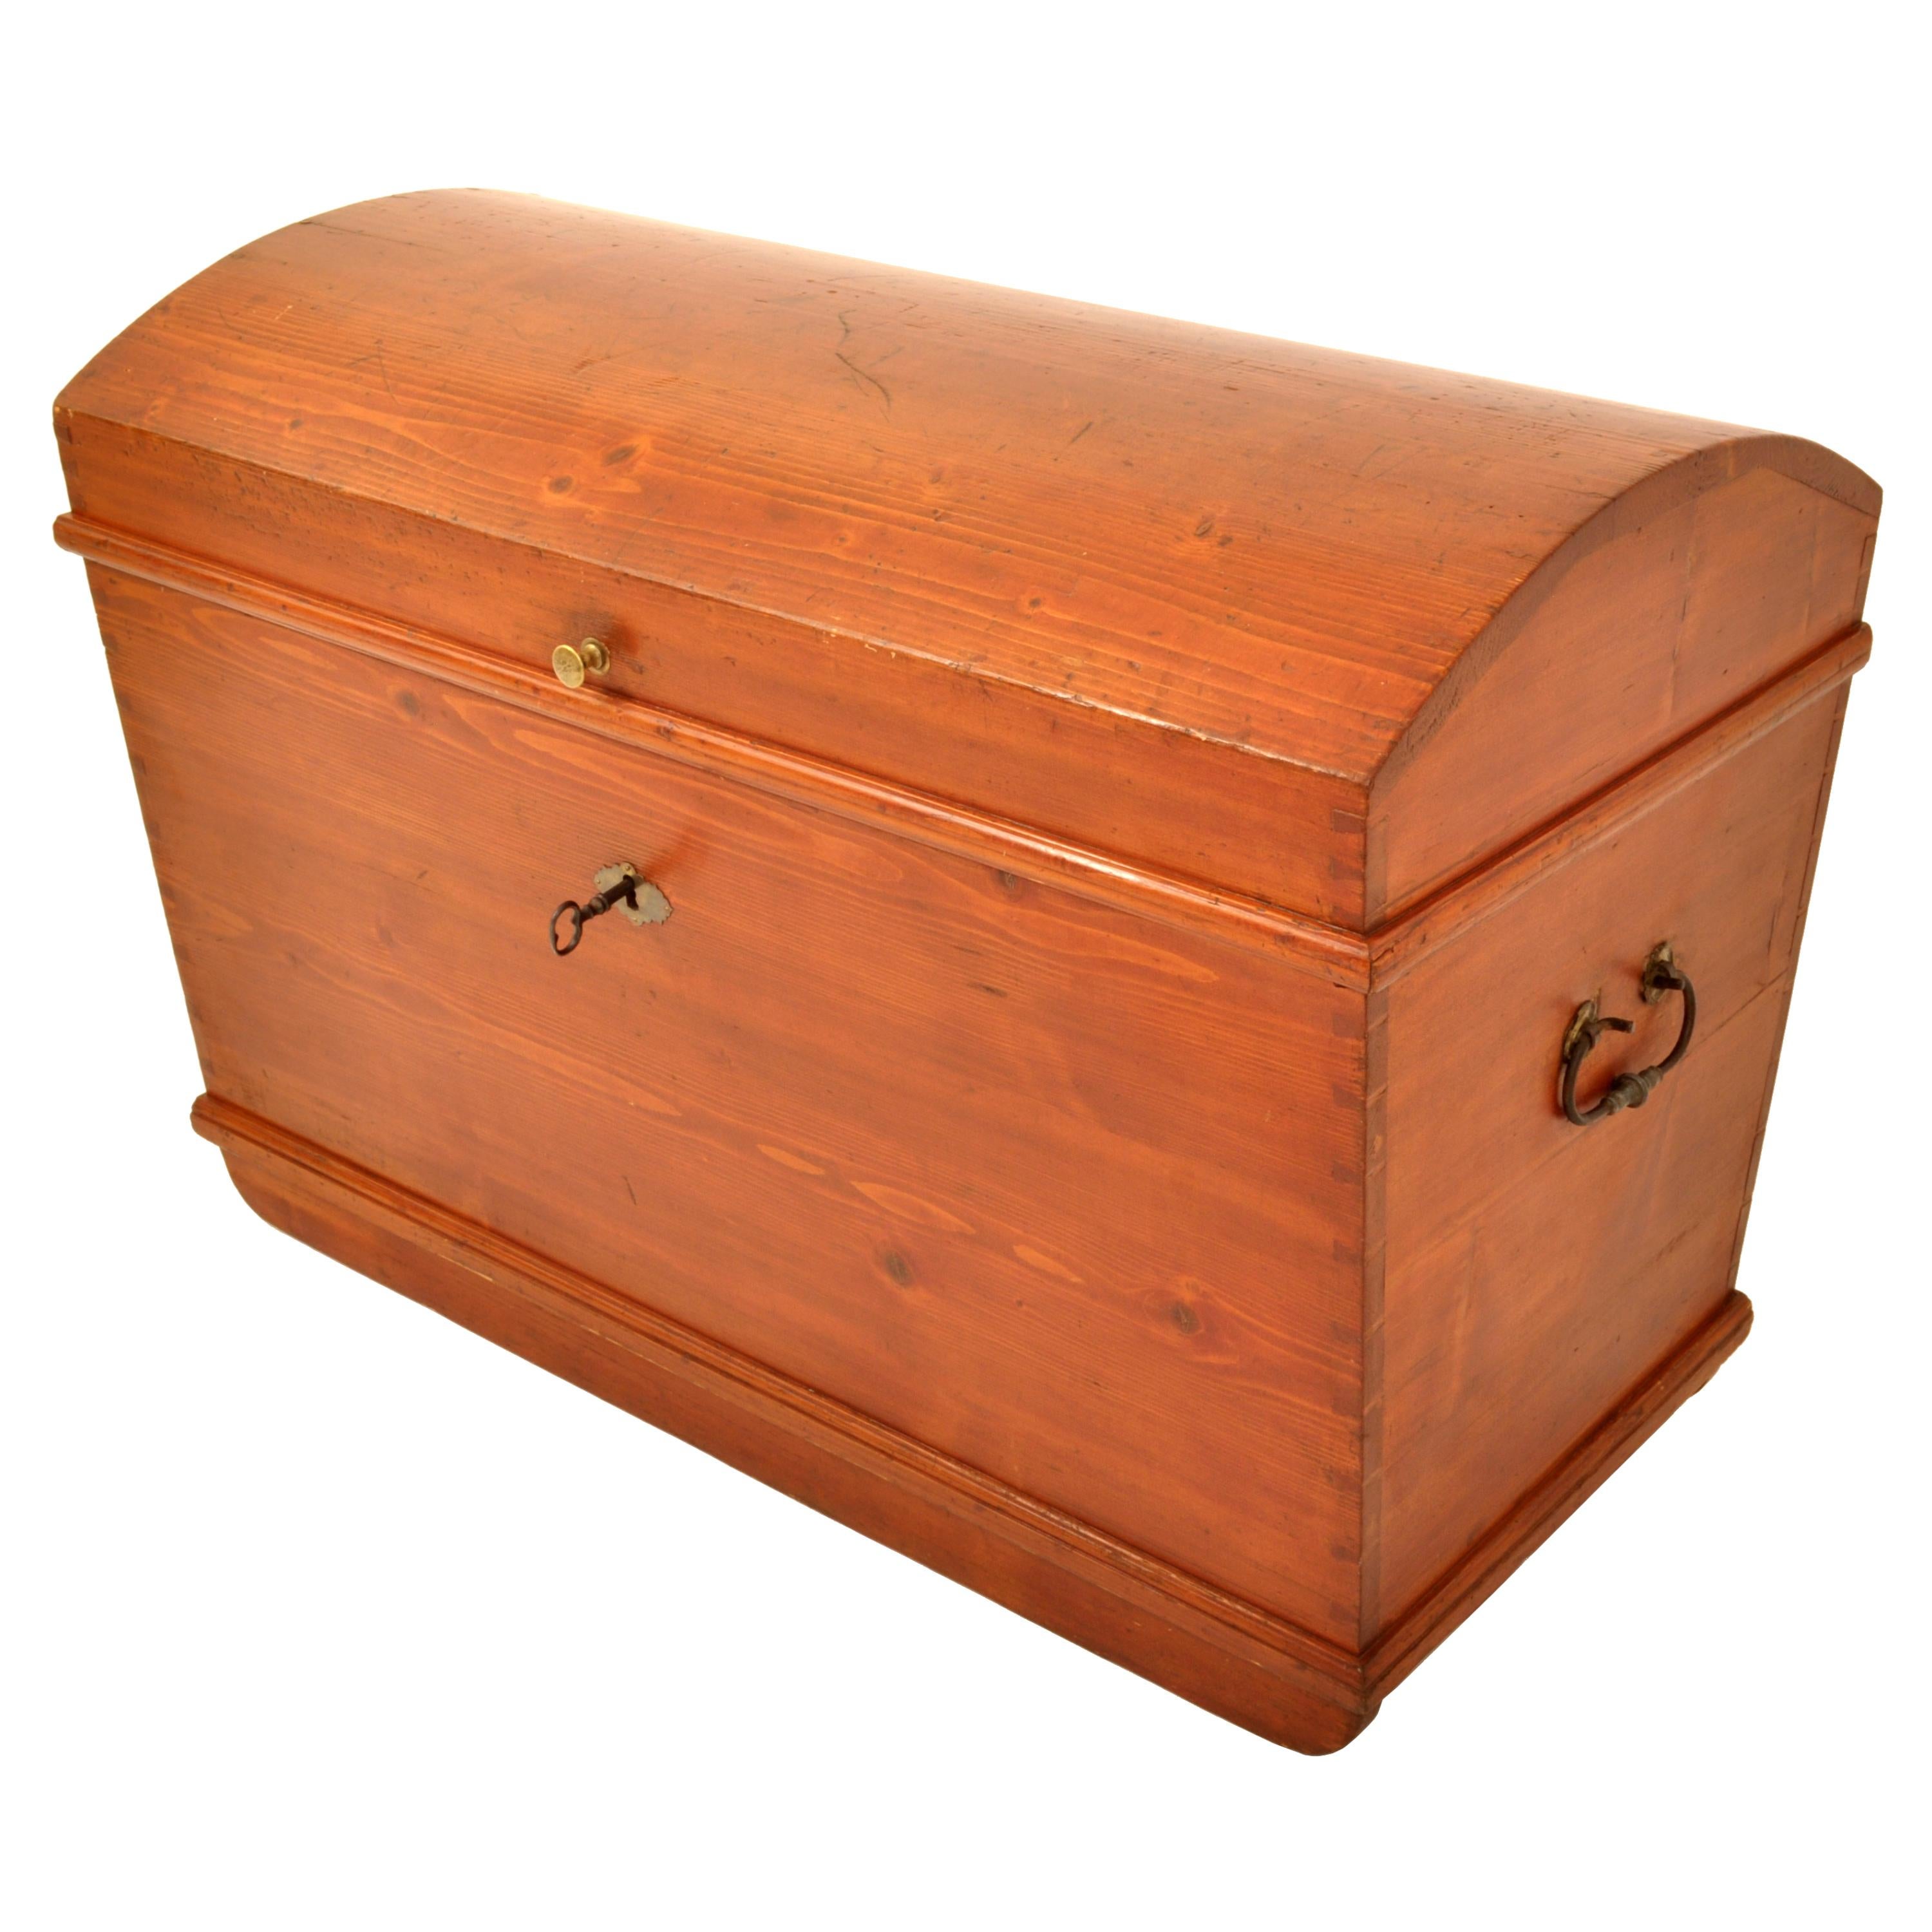 A good antique dome top German immigrant chest/trunk, blanket box, circa 1850.
The locking dome top having the original working lock and key and enclosing a single till with a hinged lid, the chest made of yellow pine and of dovetailed construction